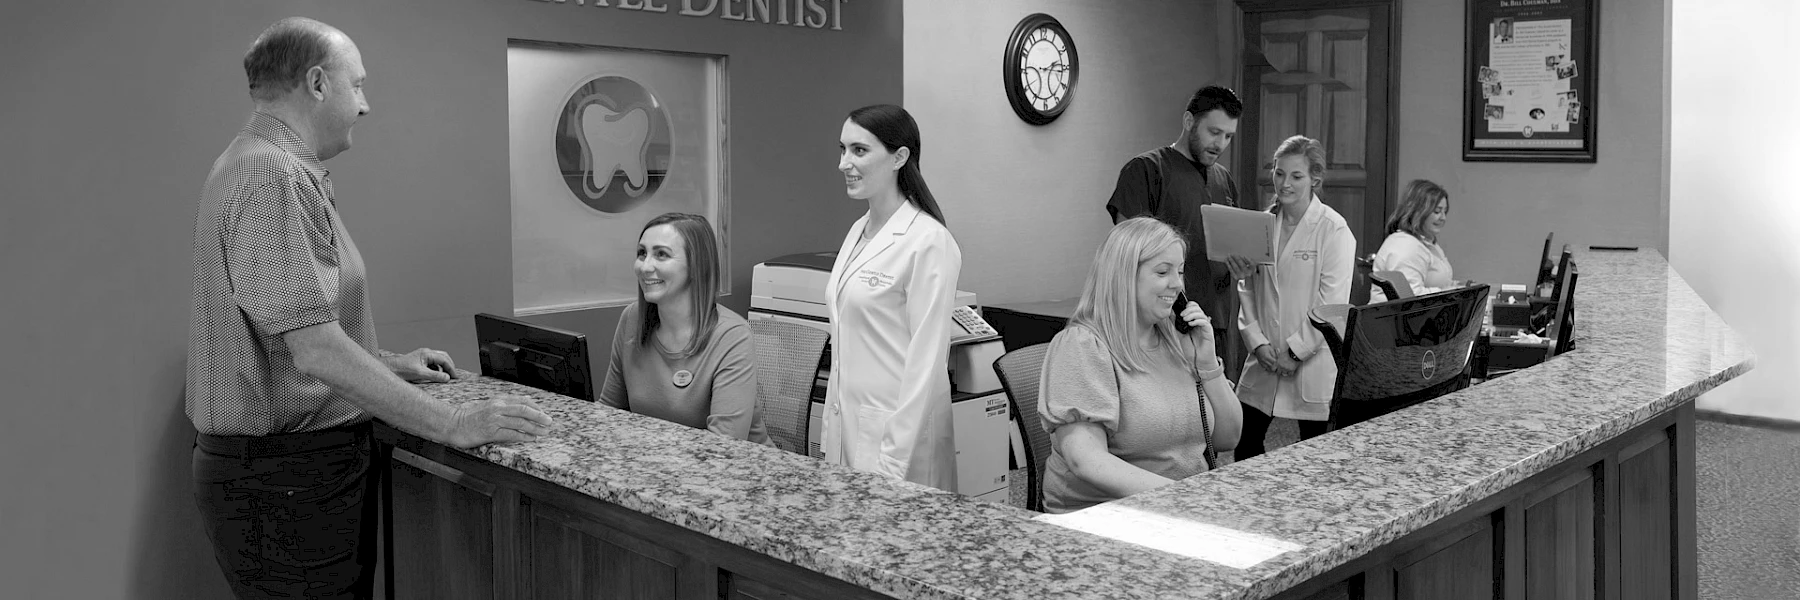 1_4_header_bw_1920x1080_review-recommend_front-desk